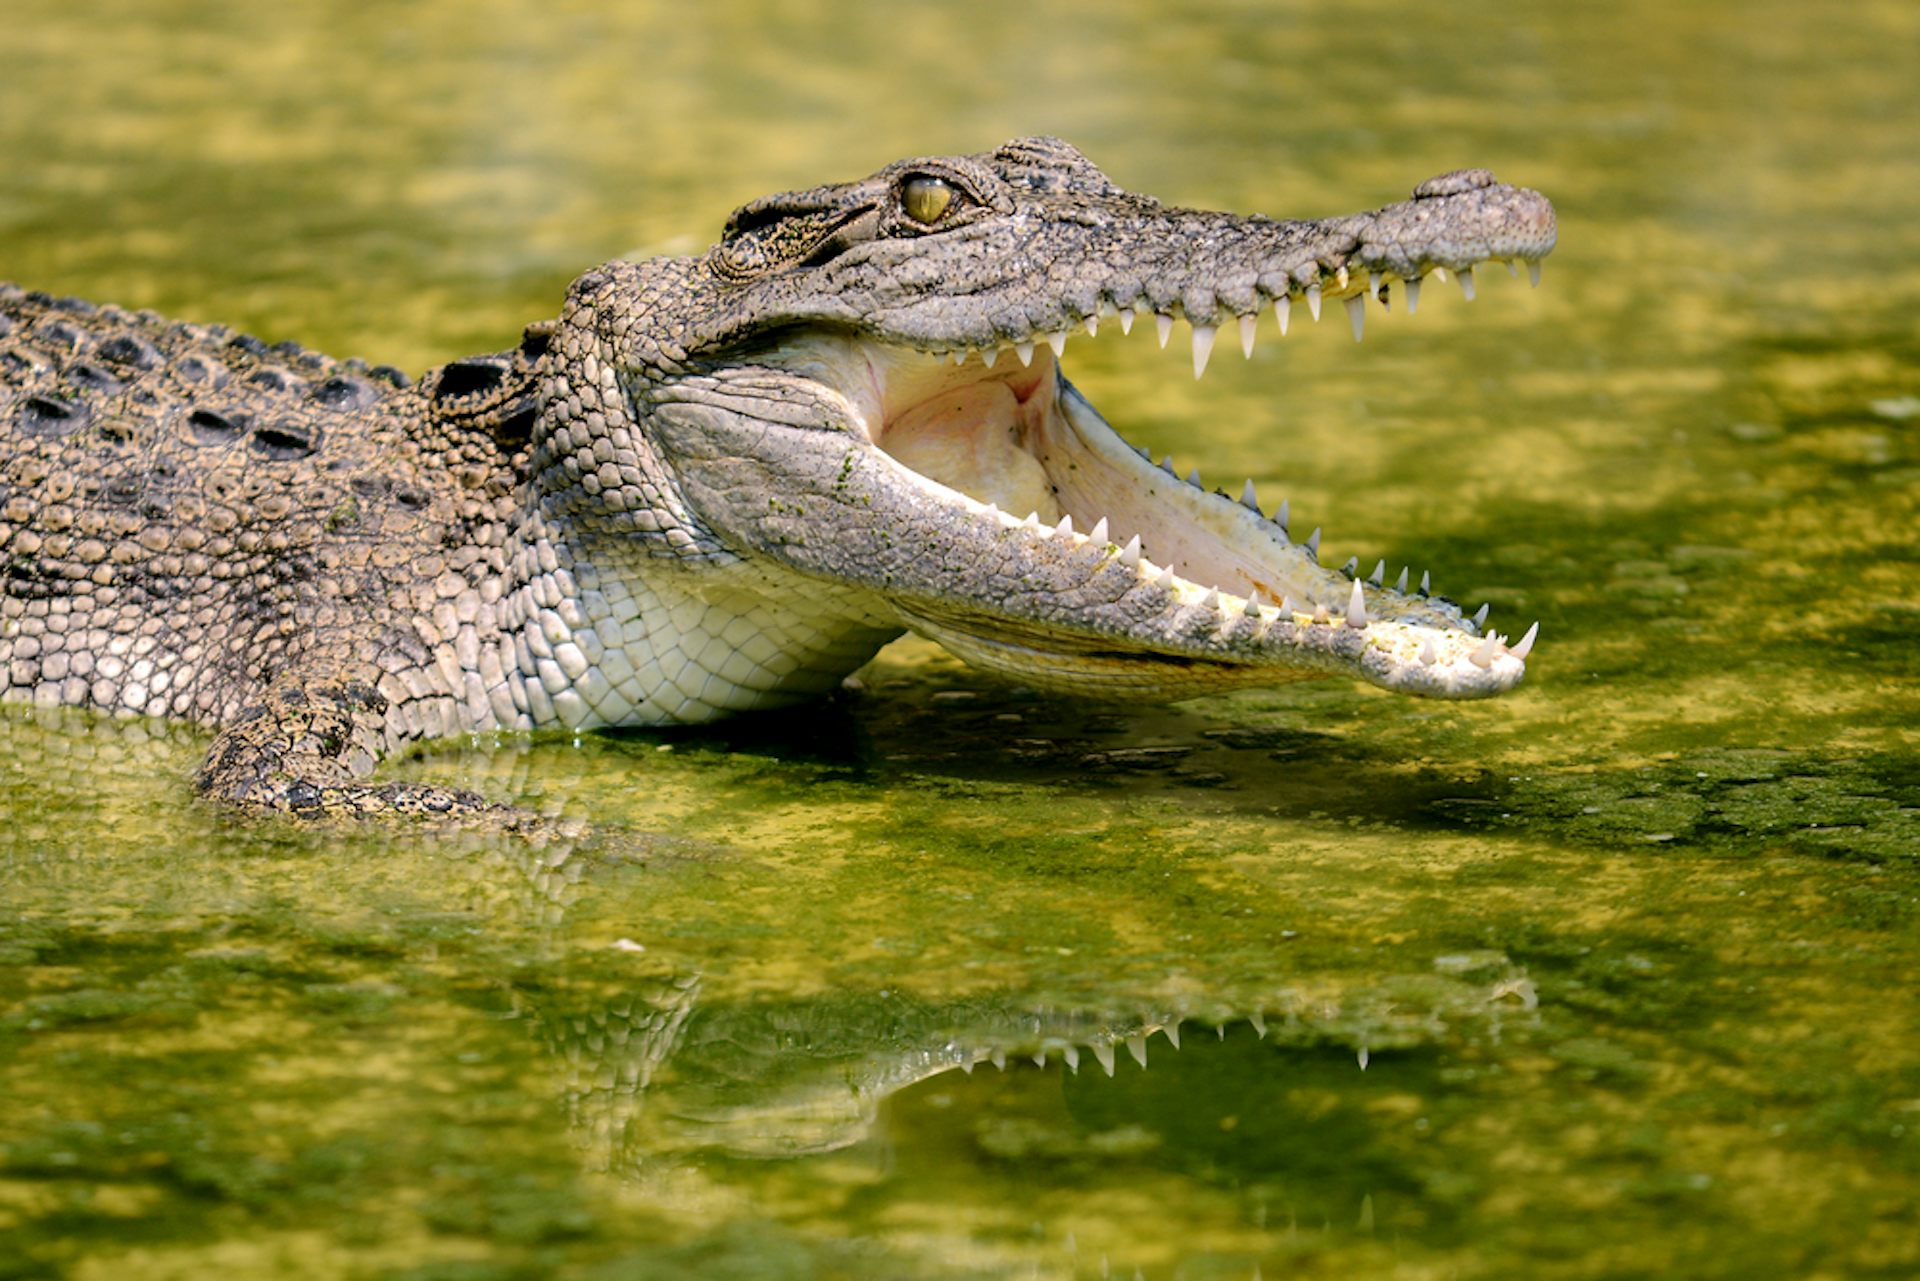 show me pictures of a crocodile